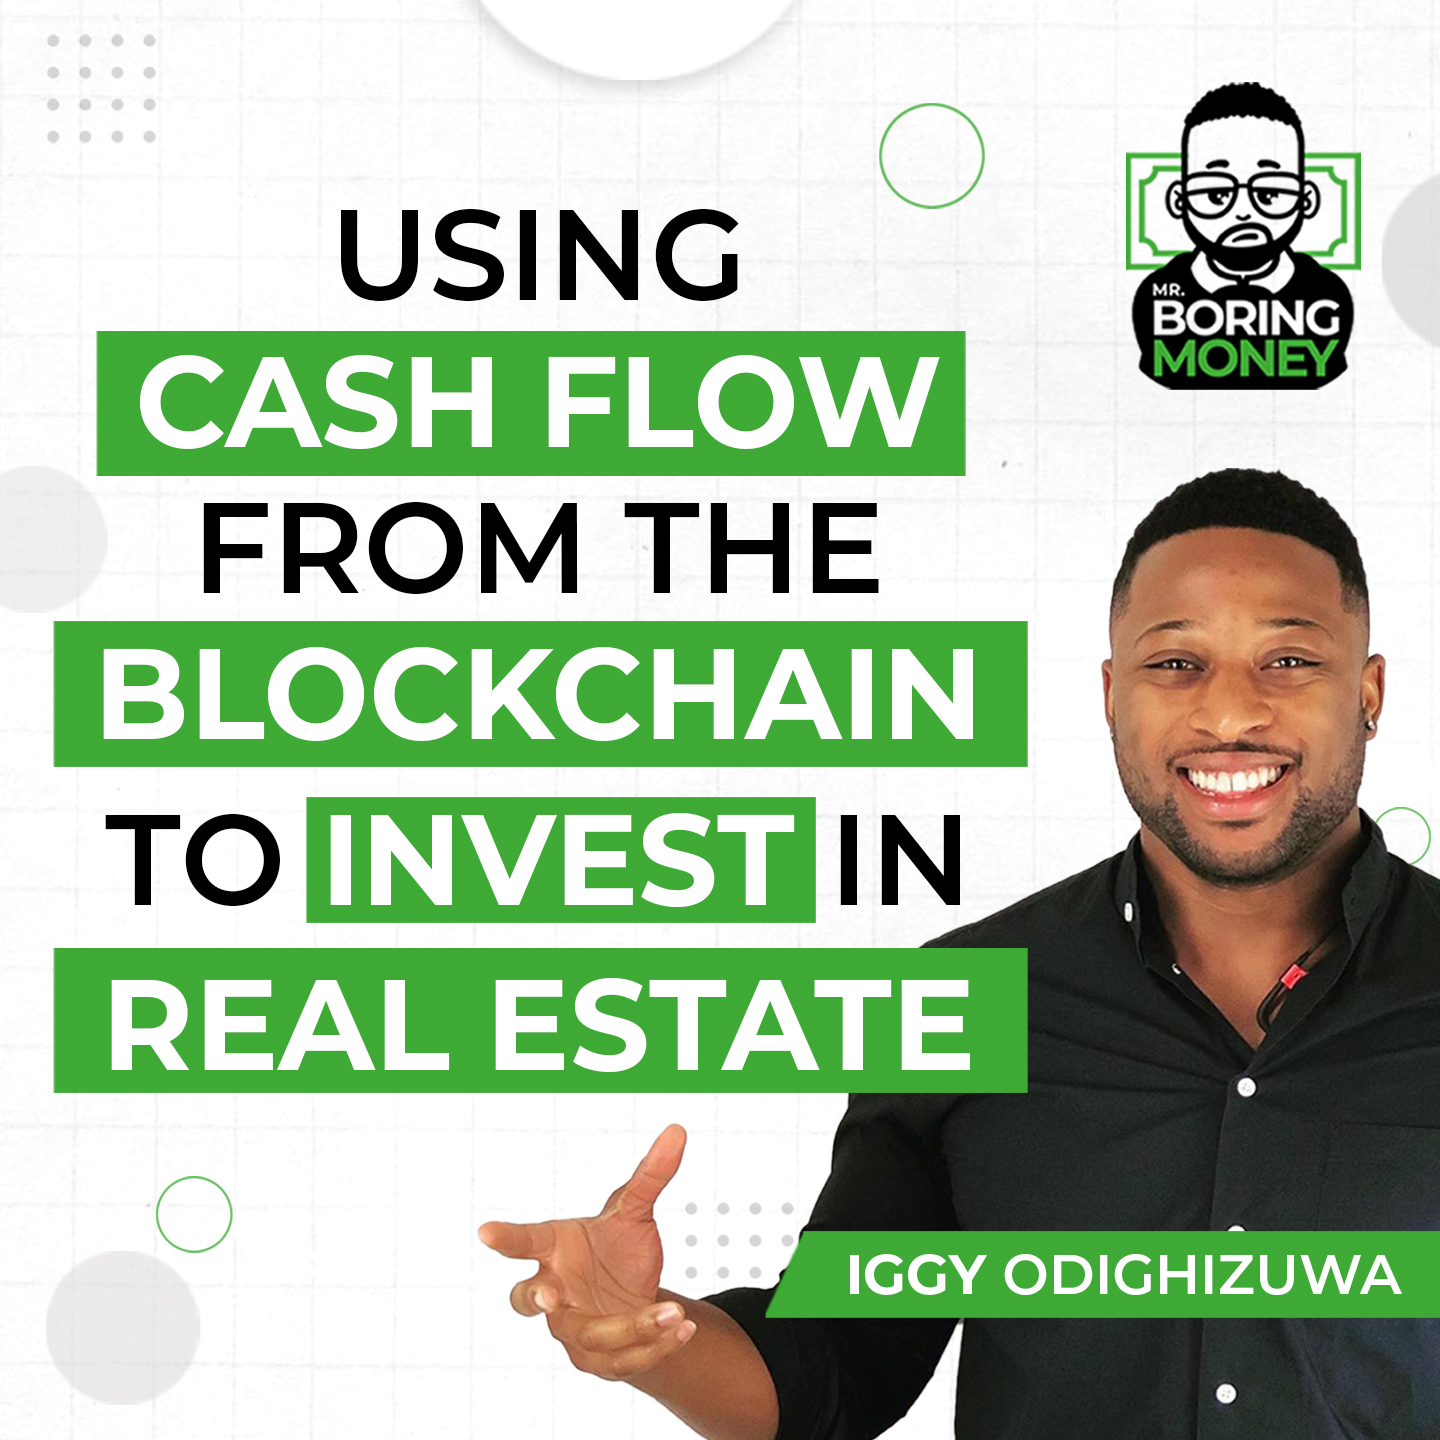 How I Use Cash Flow From The Blockchain To Invest In Real Estate